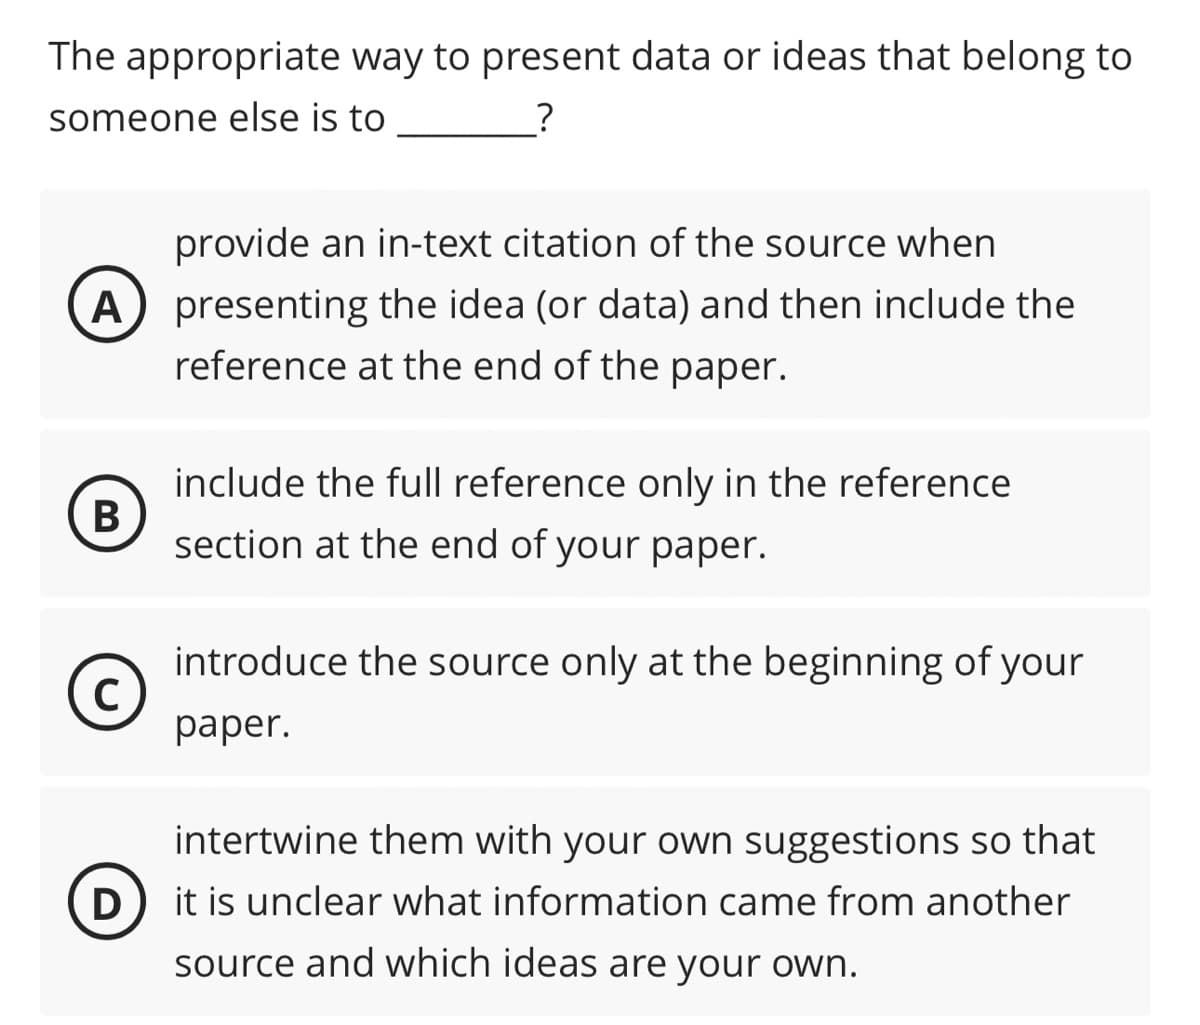 The appropriate way to present data or ideas that belong to
someone else is to
?
A
B
C
provide an in-text citation of the source when
presenting the idea (or data) and then include the
reference at the end of the paper.
include the full reference only in the reference
section at the end of your paper.
introduce the source only at the beginning of your
paper.
D
intertwine them with your own suggestions so that
it is unclear what information came from another
source and which ideas are your own.